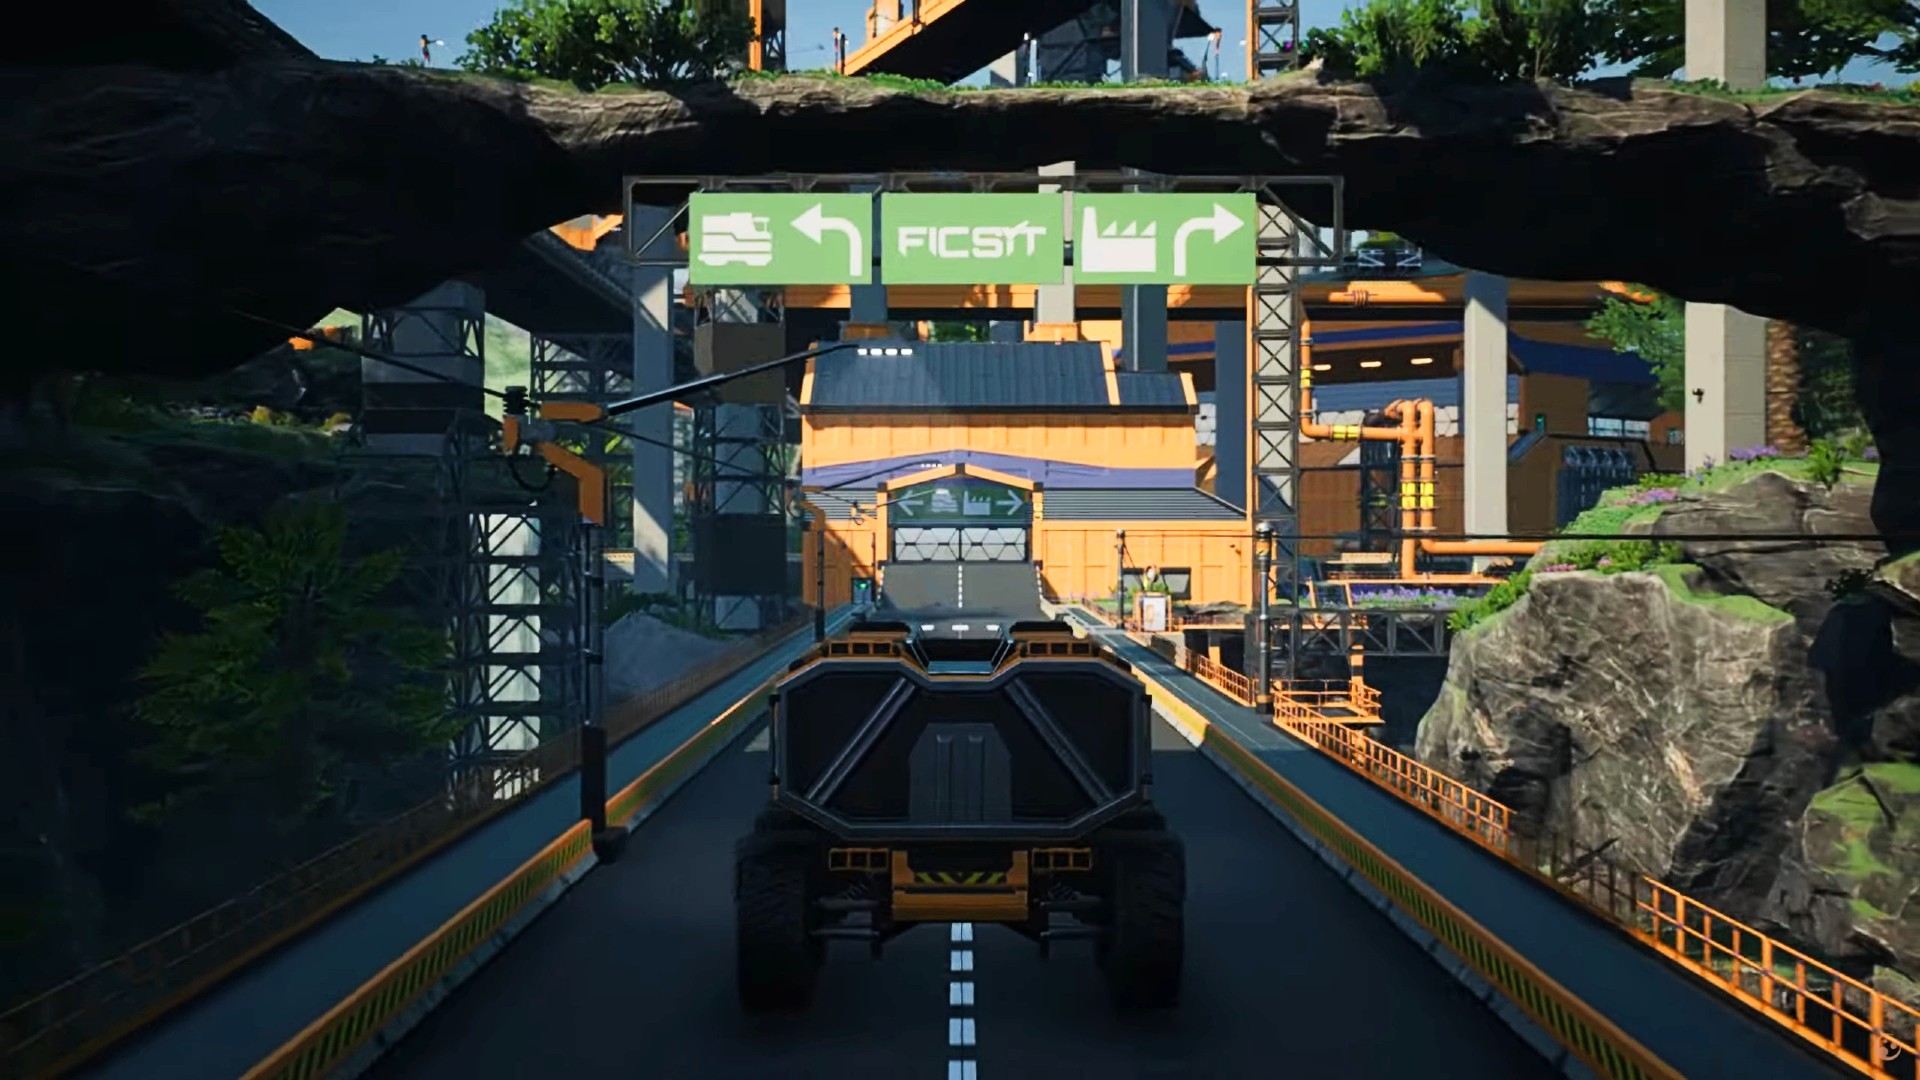 Satisfactory’s Update 5 adds new signs, signals, and dedicated servers